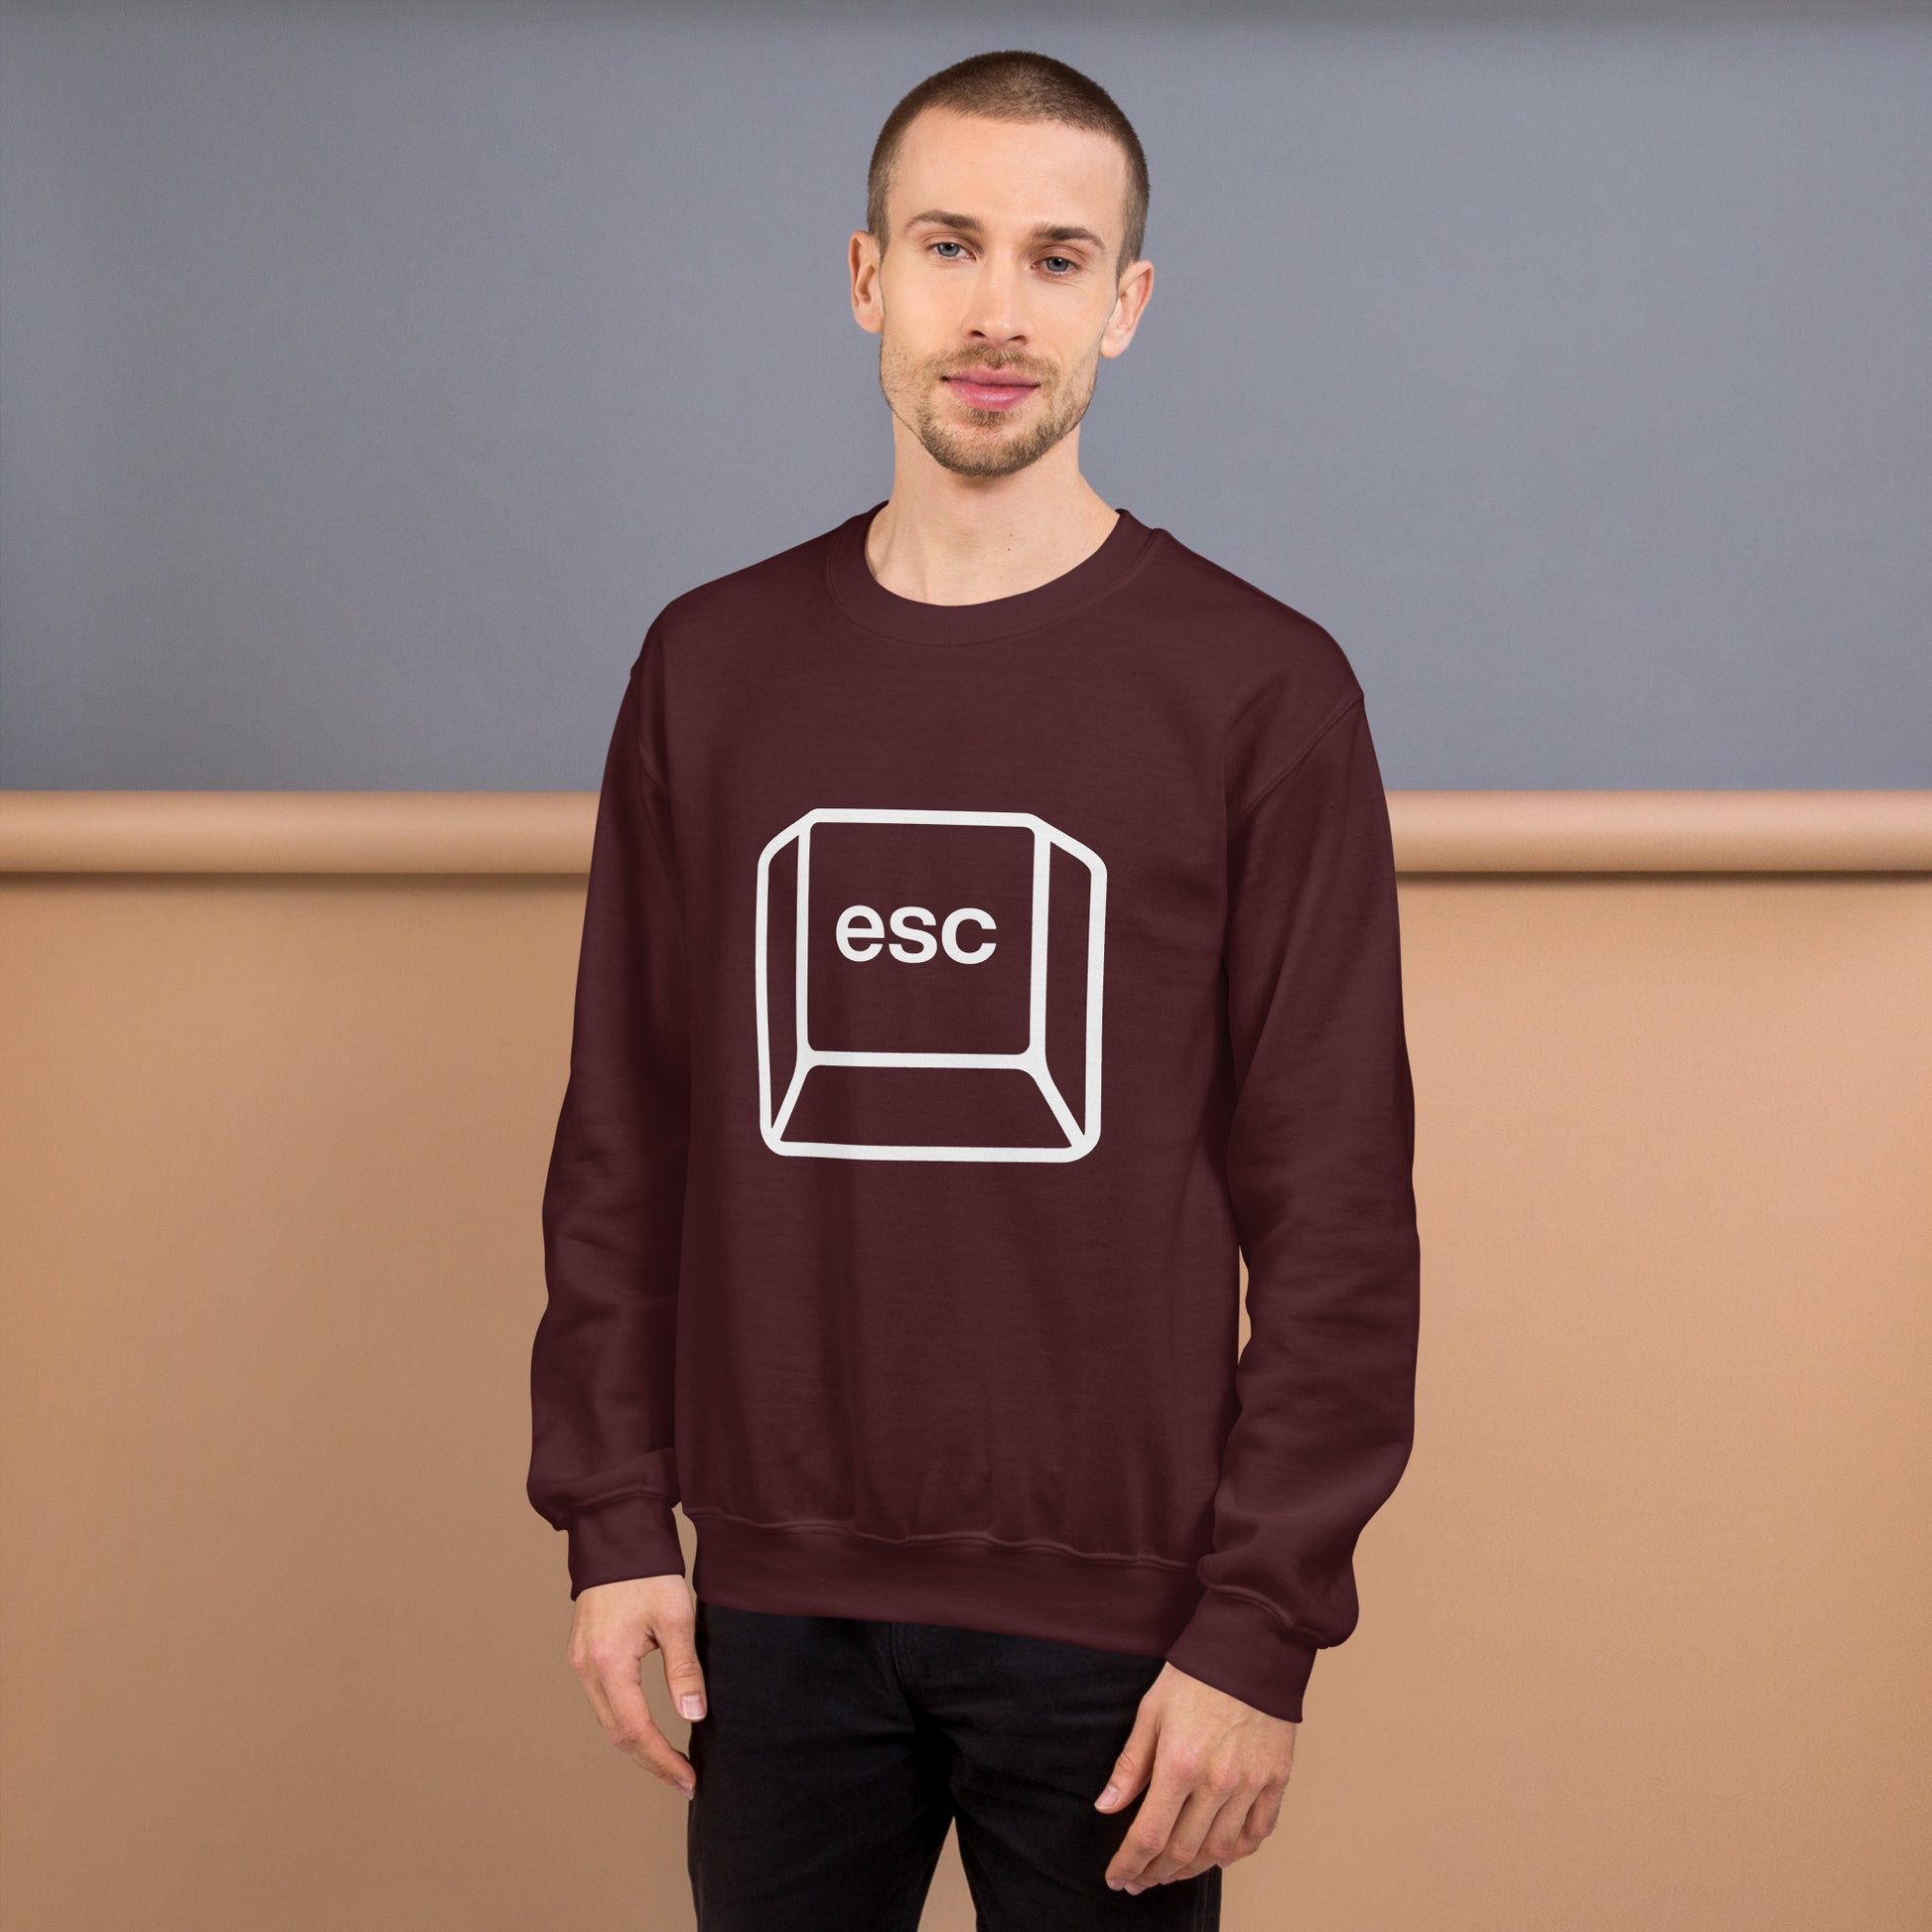 Man with maroon sweatshirt with picture of esc key